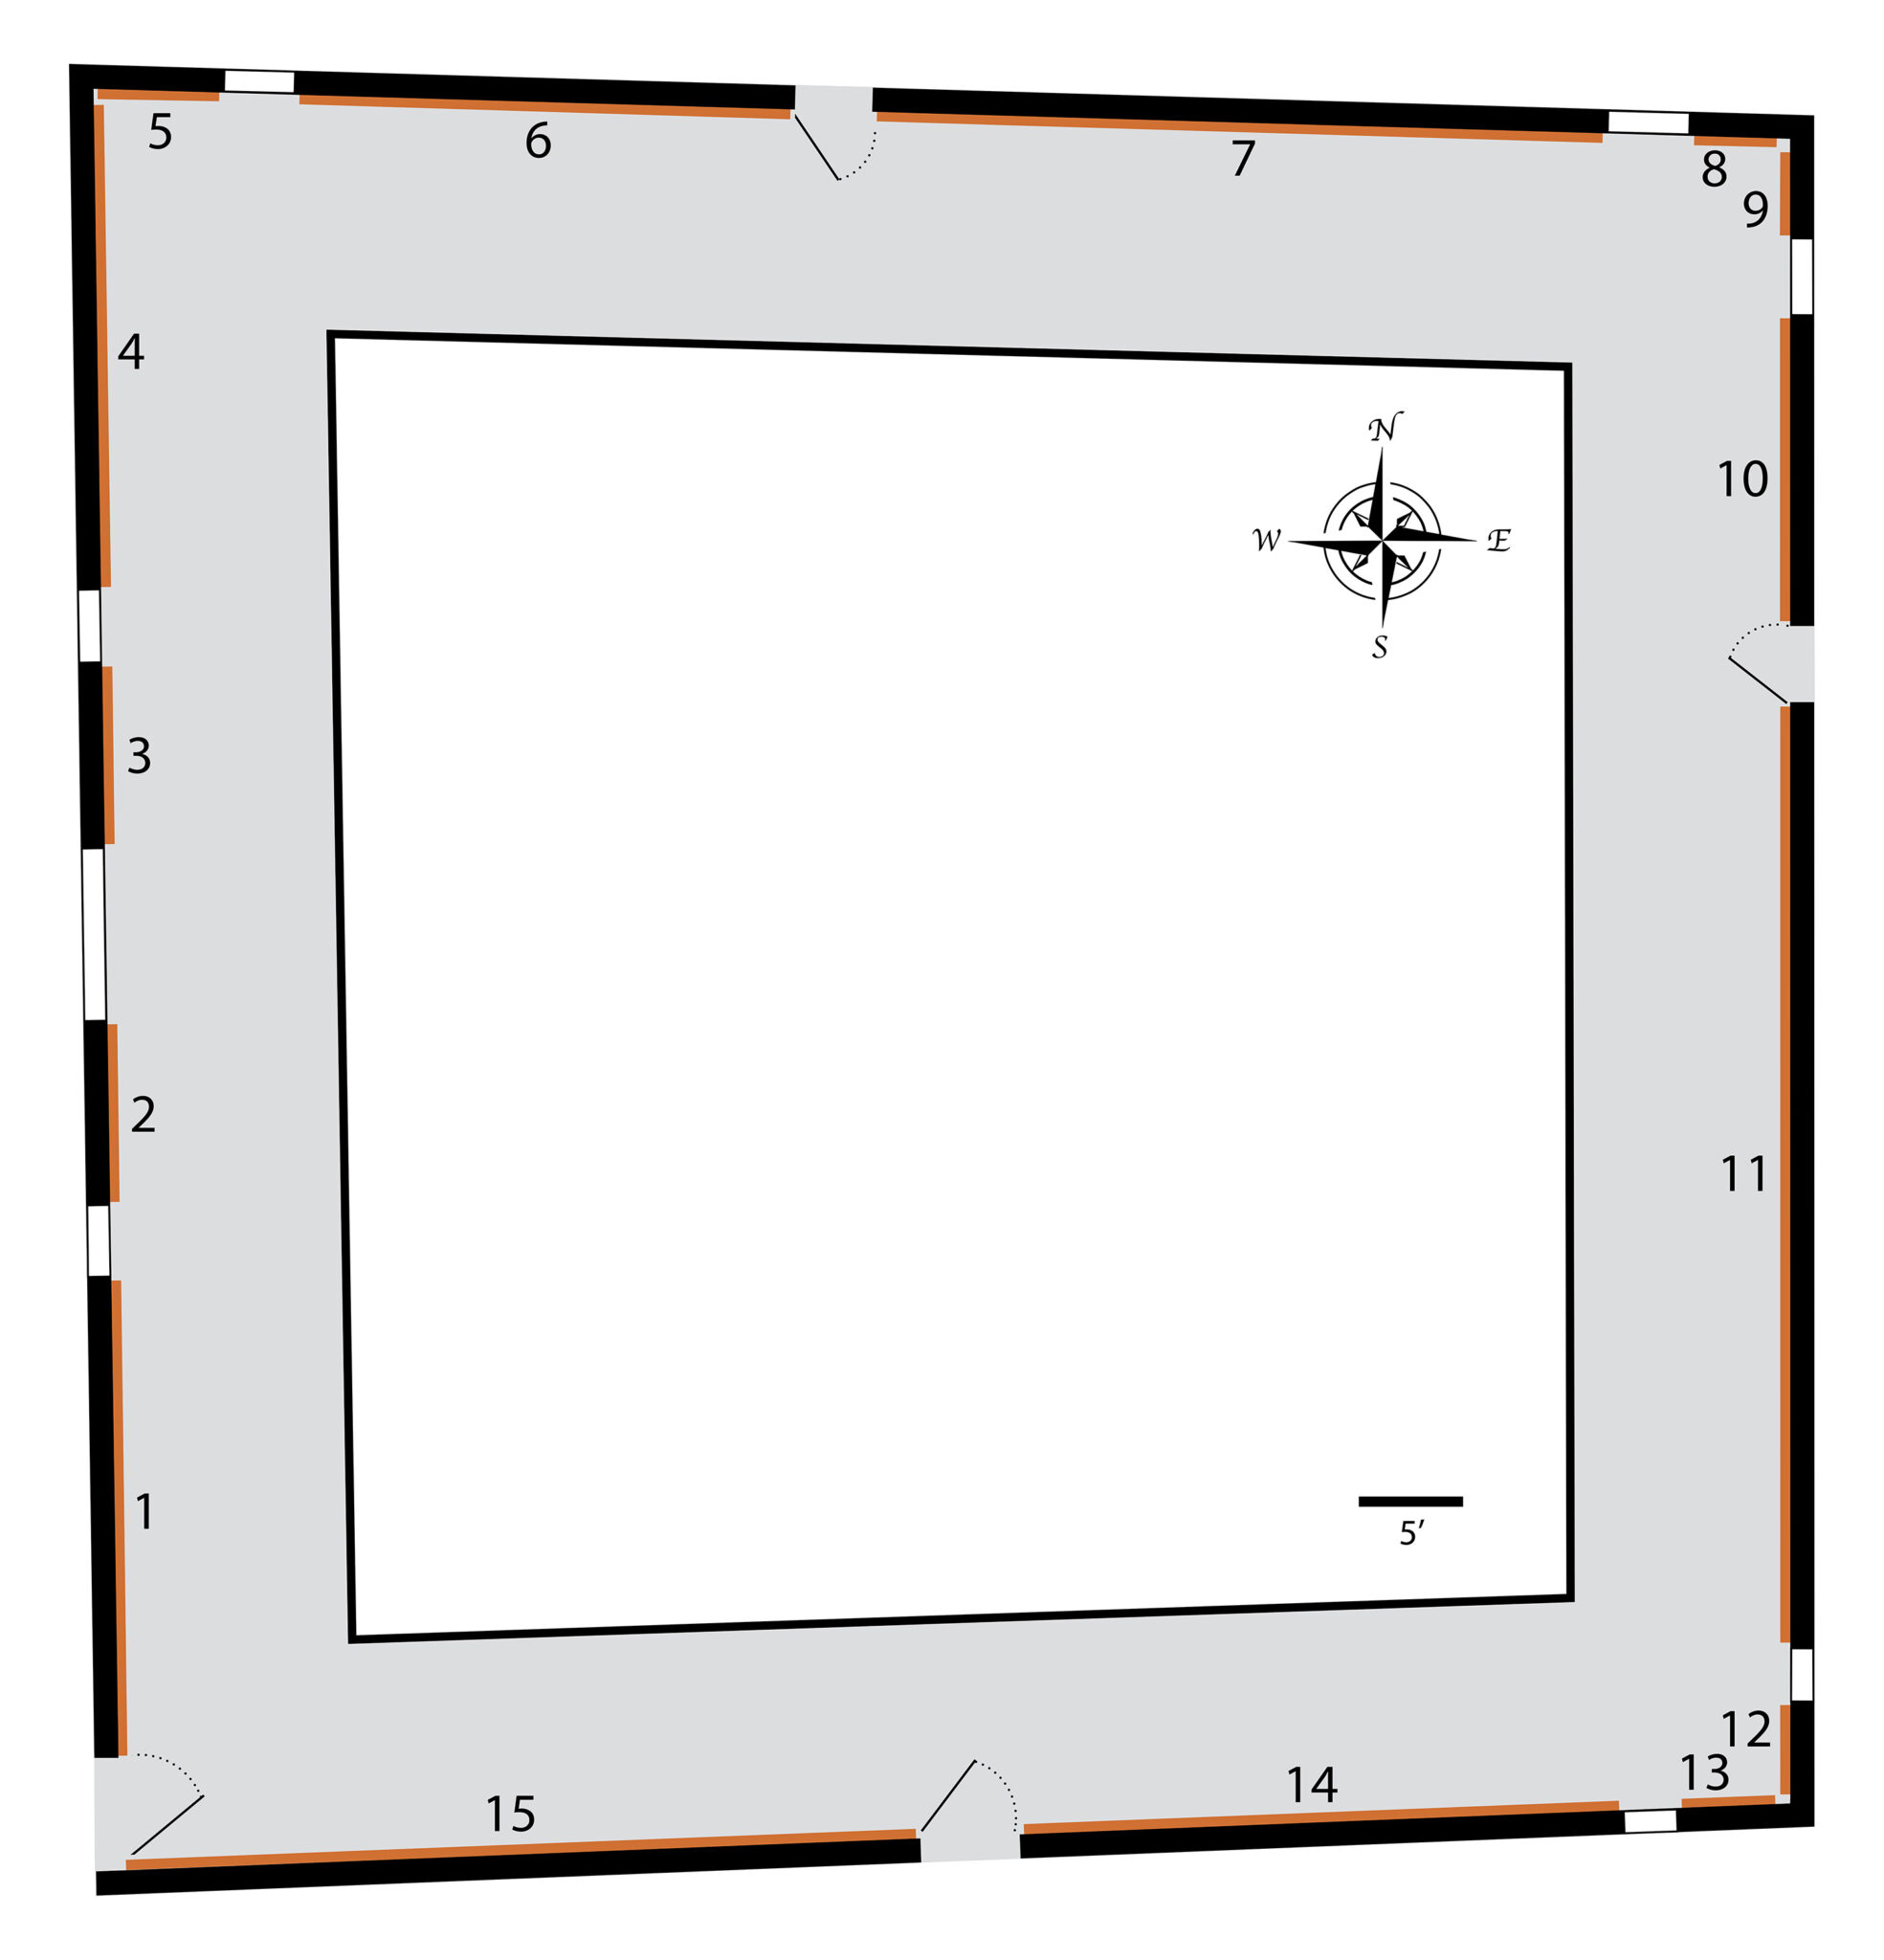 Numbered, square diagram describing placement of murals in temple decoration; compass at top right, bar scale at bottom right